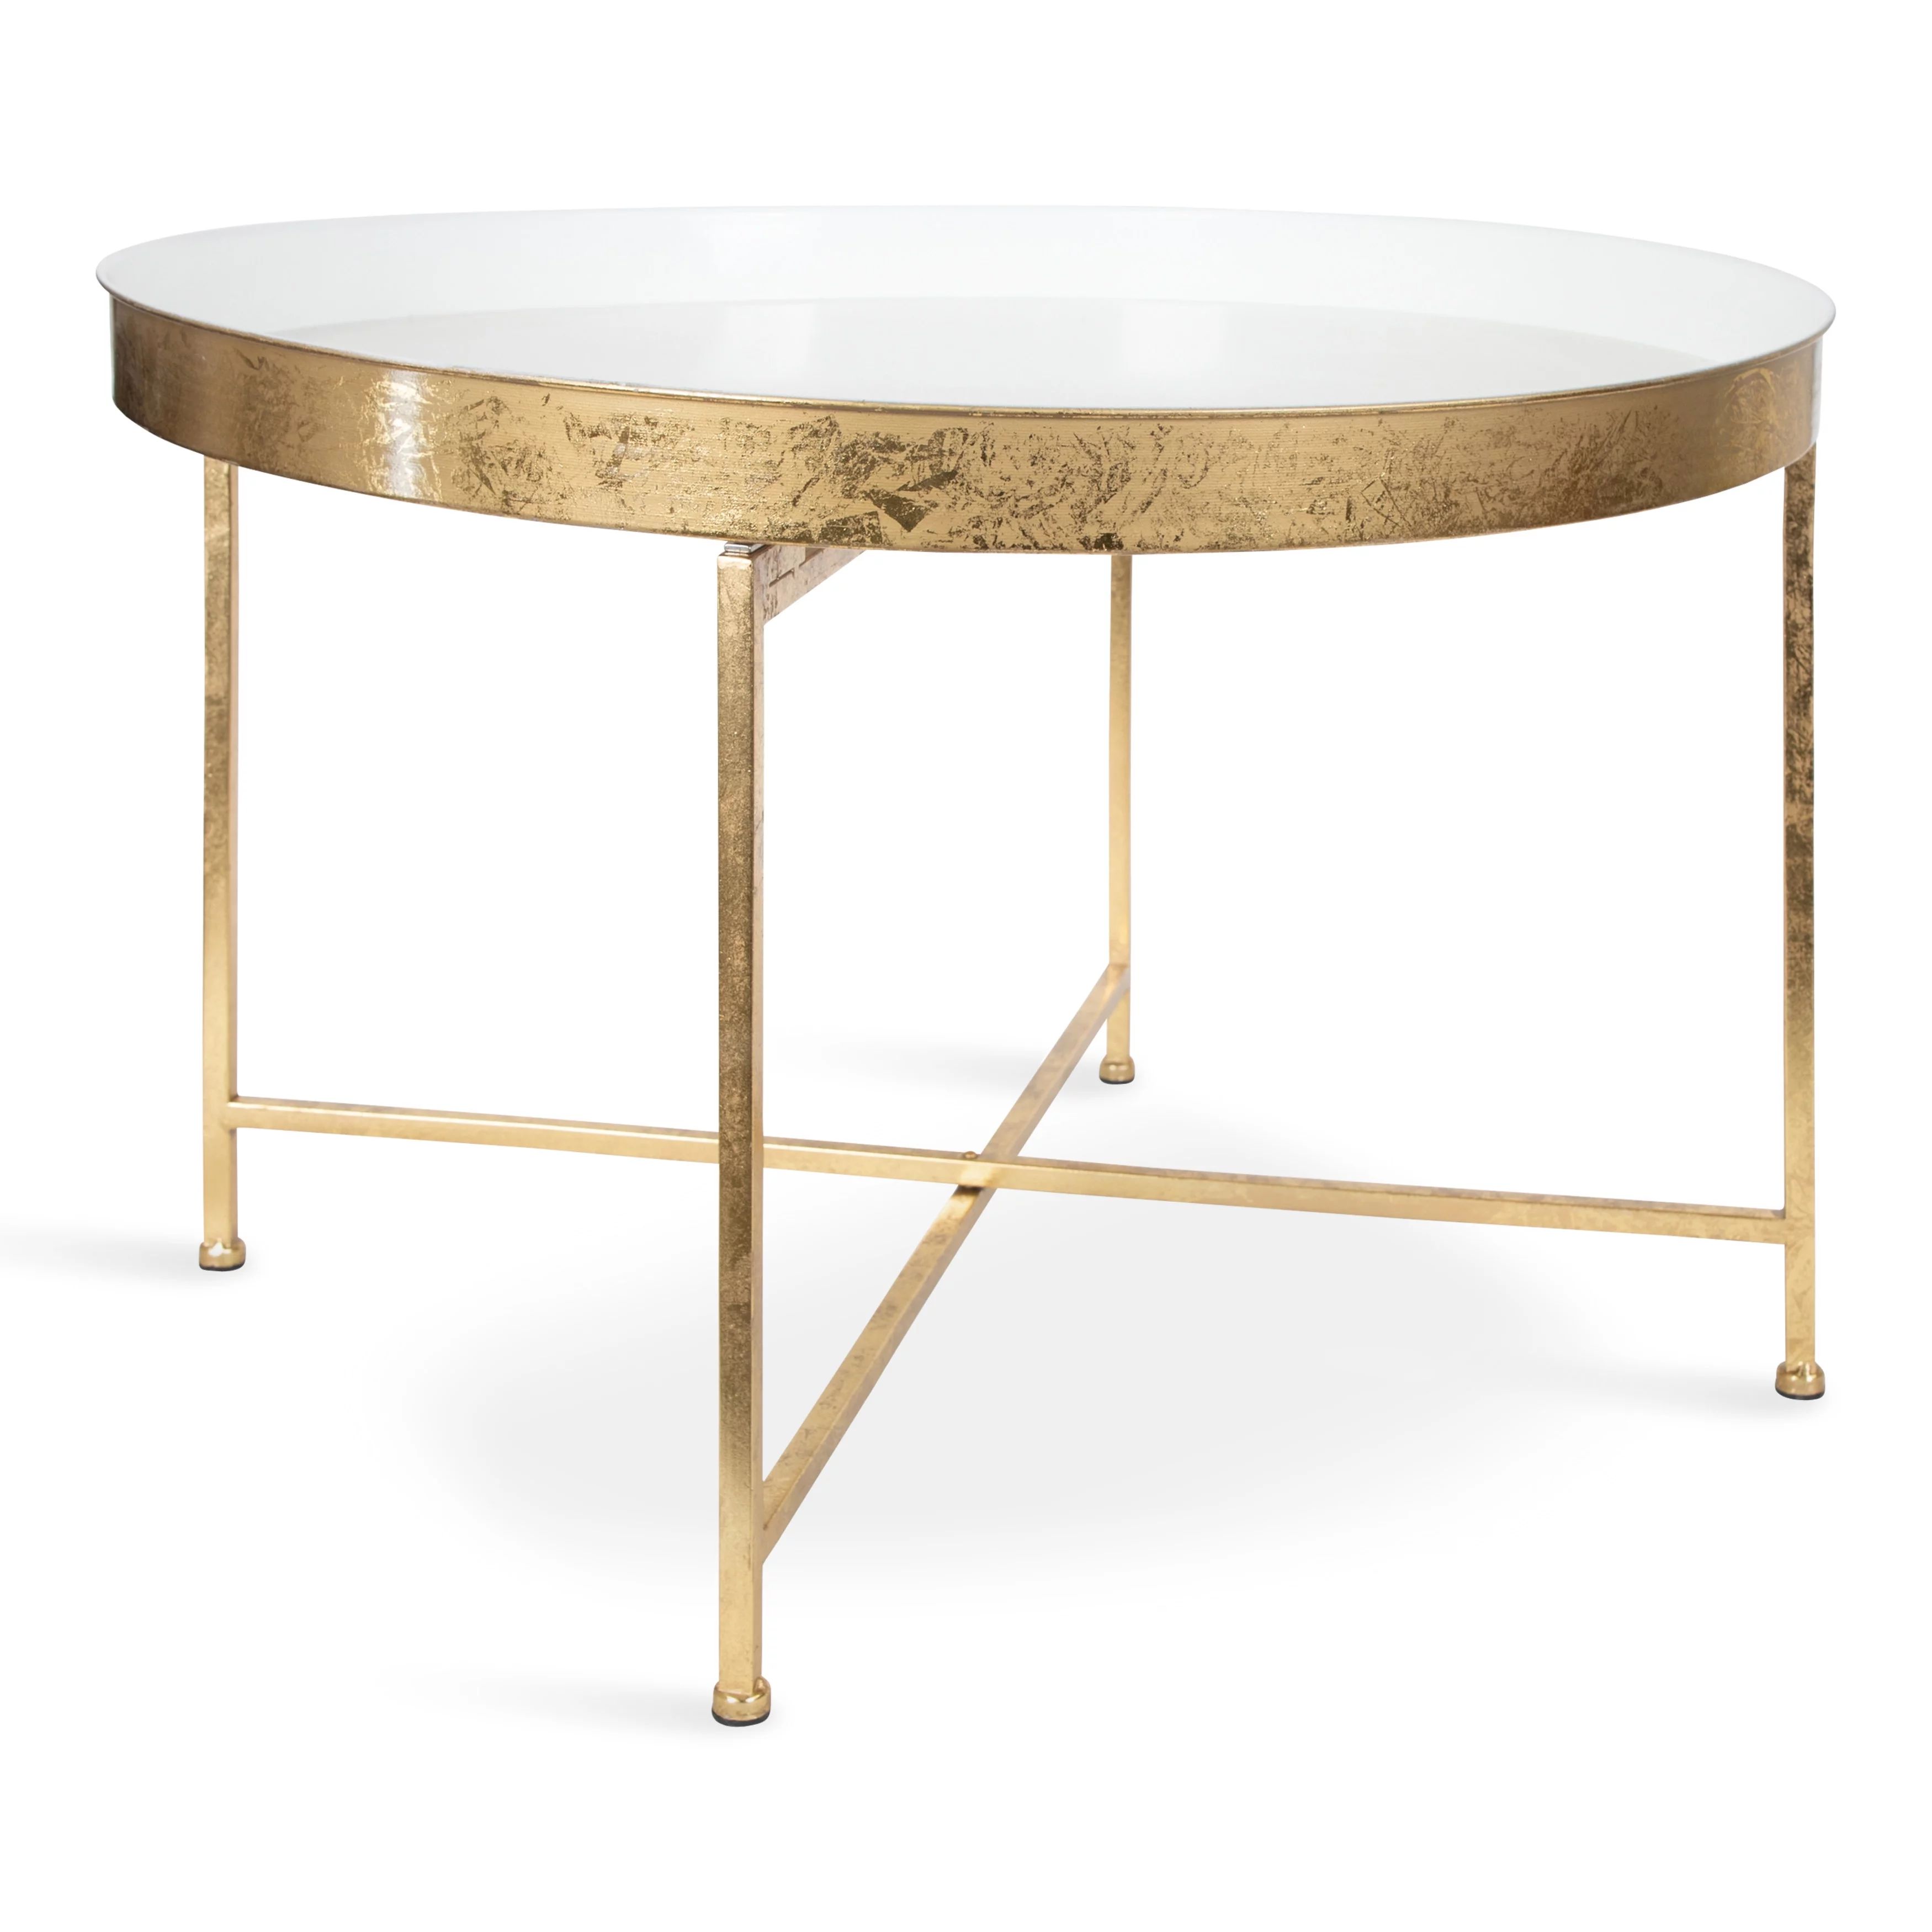 Kate and Laurel Celia Modern Glam Round Metal Coffee Table, 28.25" x 28.25" x 19", White and Gold... | Walmart (US)